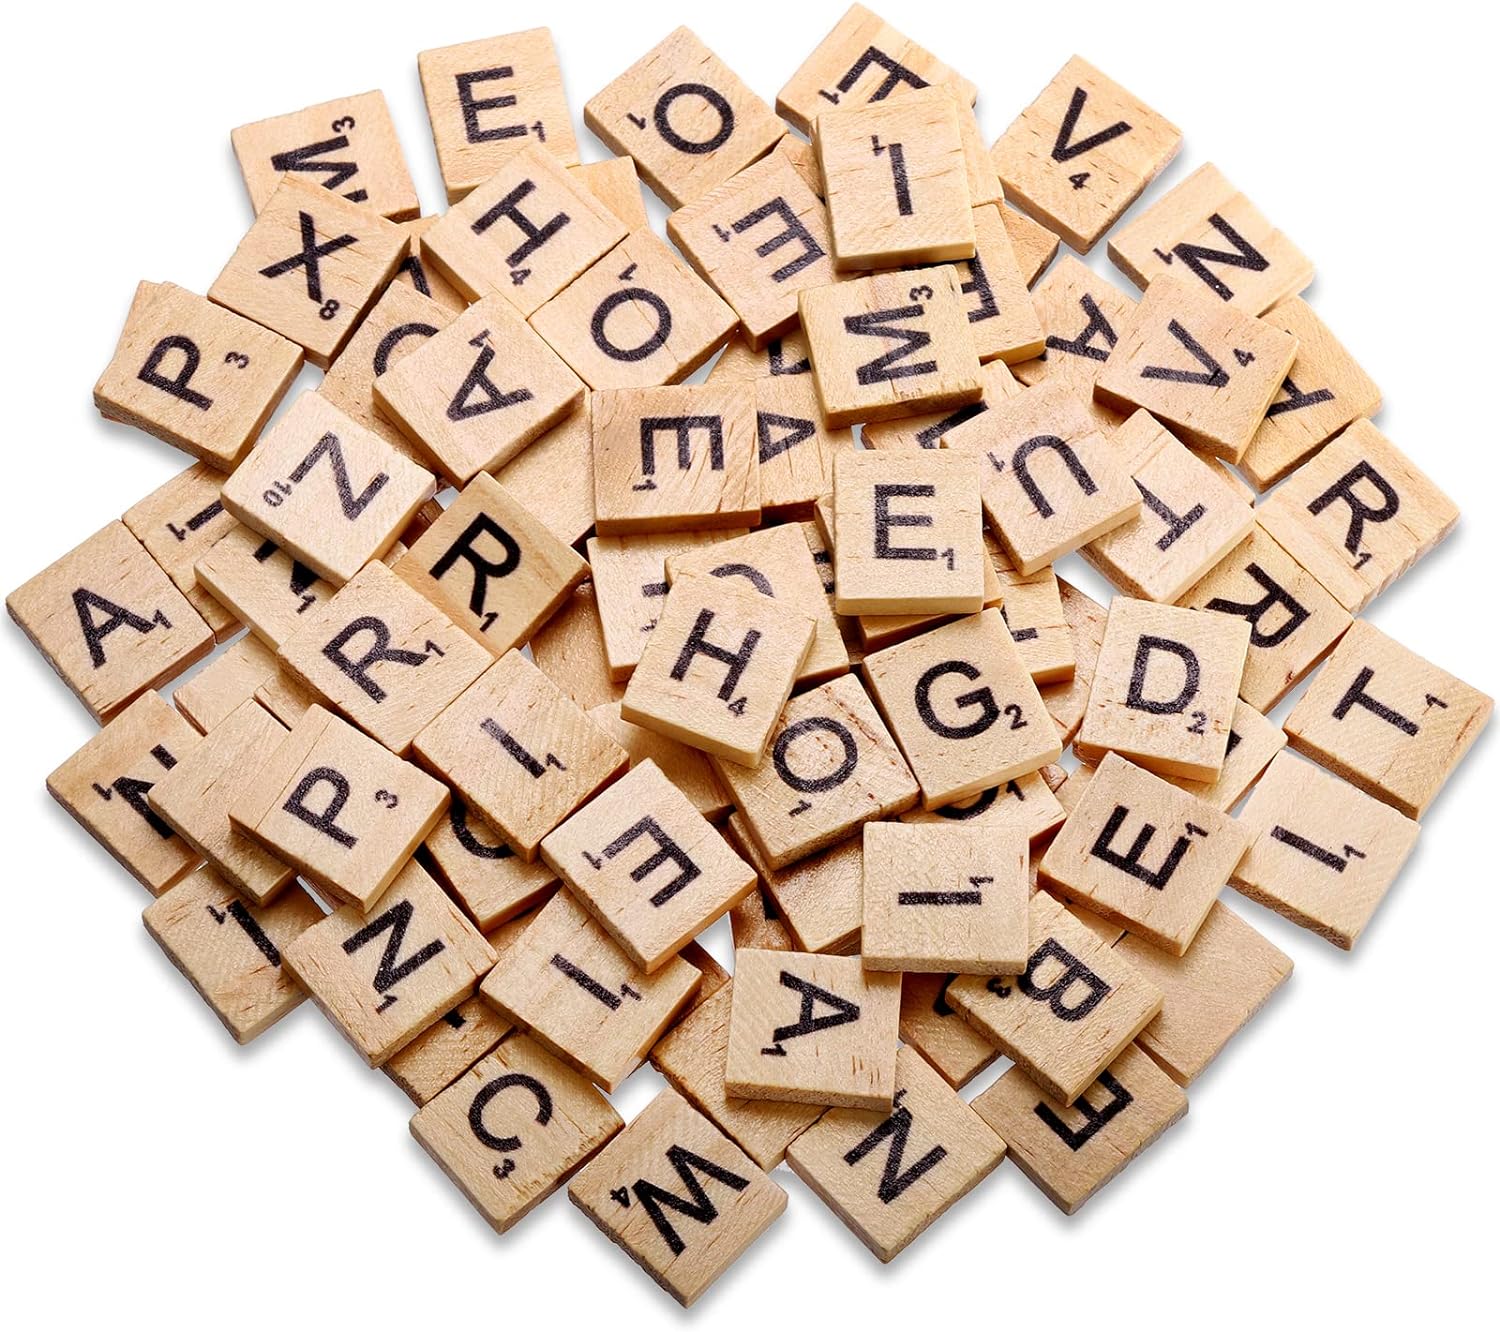 Letter tiles for use with Scrabble and similar word games like A Word or Two. 